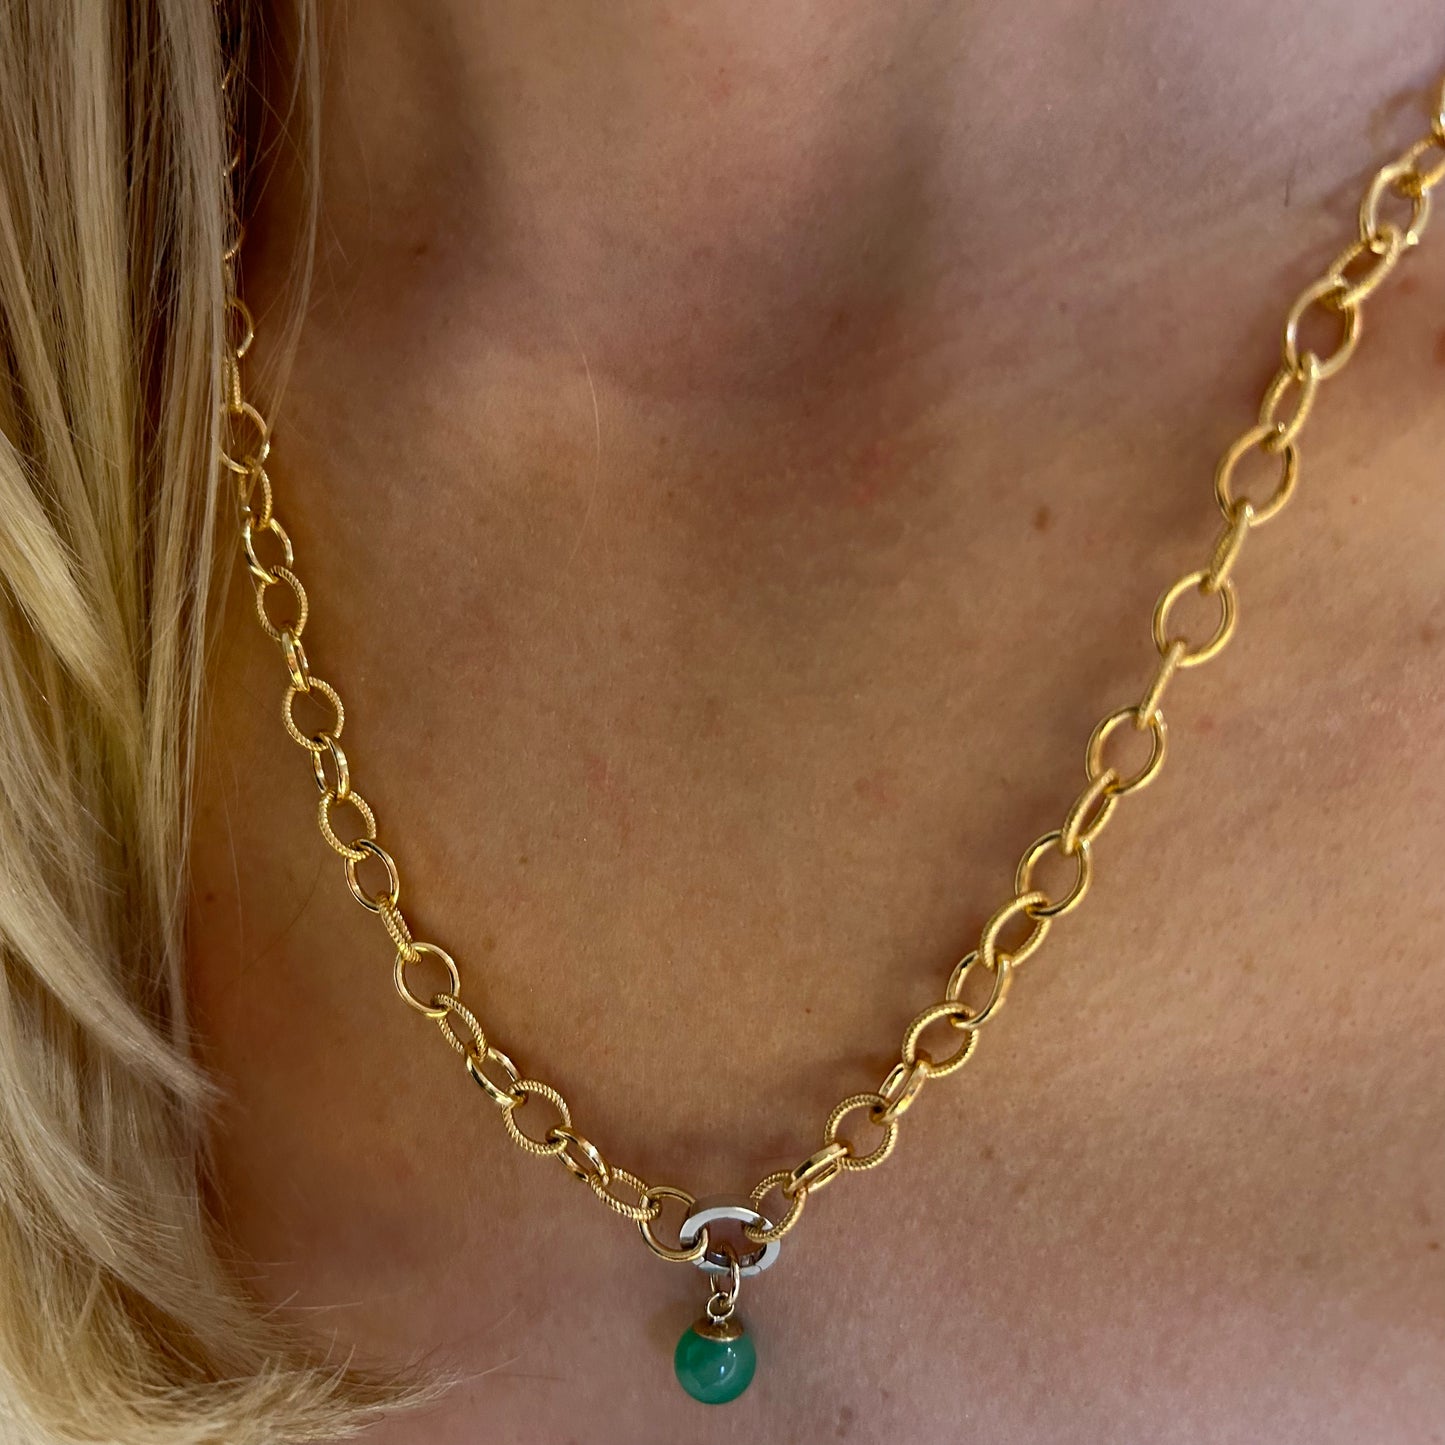 Chunky textured 14k gold filled chain with 14k white gold shortener and jade pendant